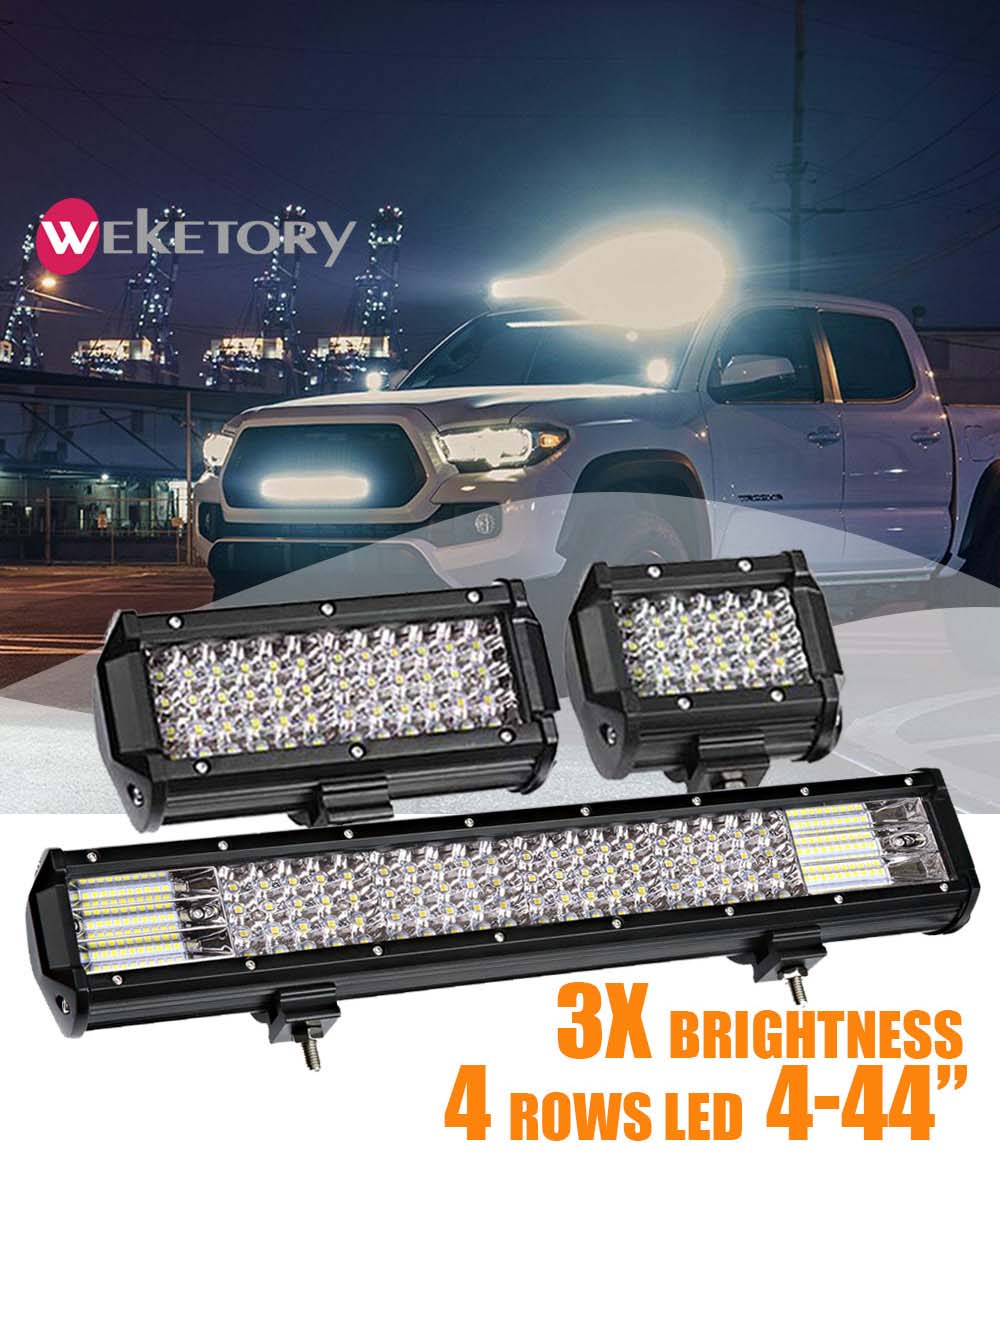 weketory Quad Rows 4 - 44 Inch LED Bar LED Light Bar for Car Tractor Boat  OffRoad Off Road 4WD 4x4 Truck SUV ATV Driving 12V 24V - Price history &  Review